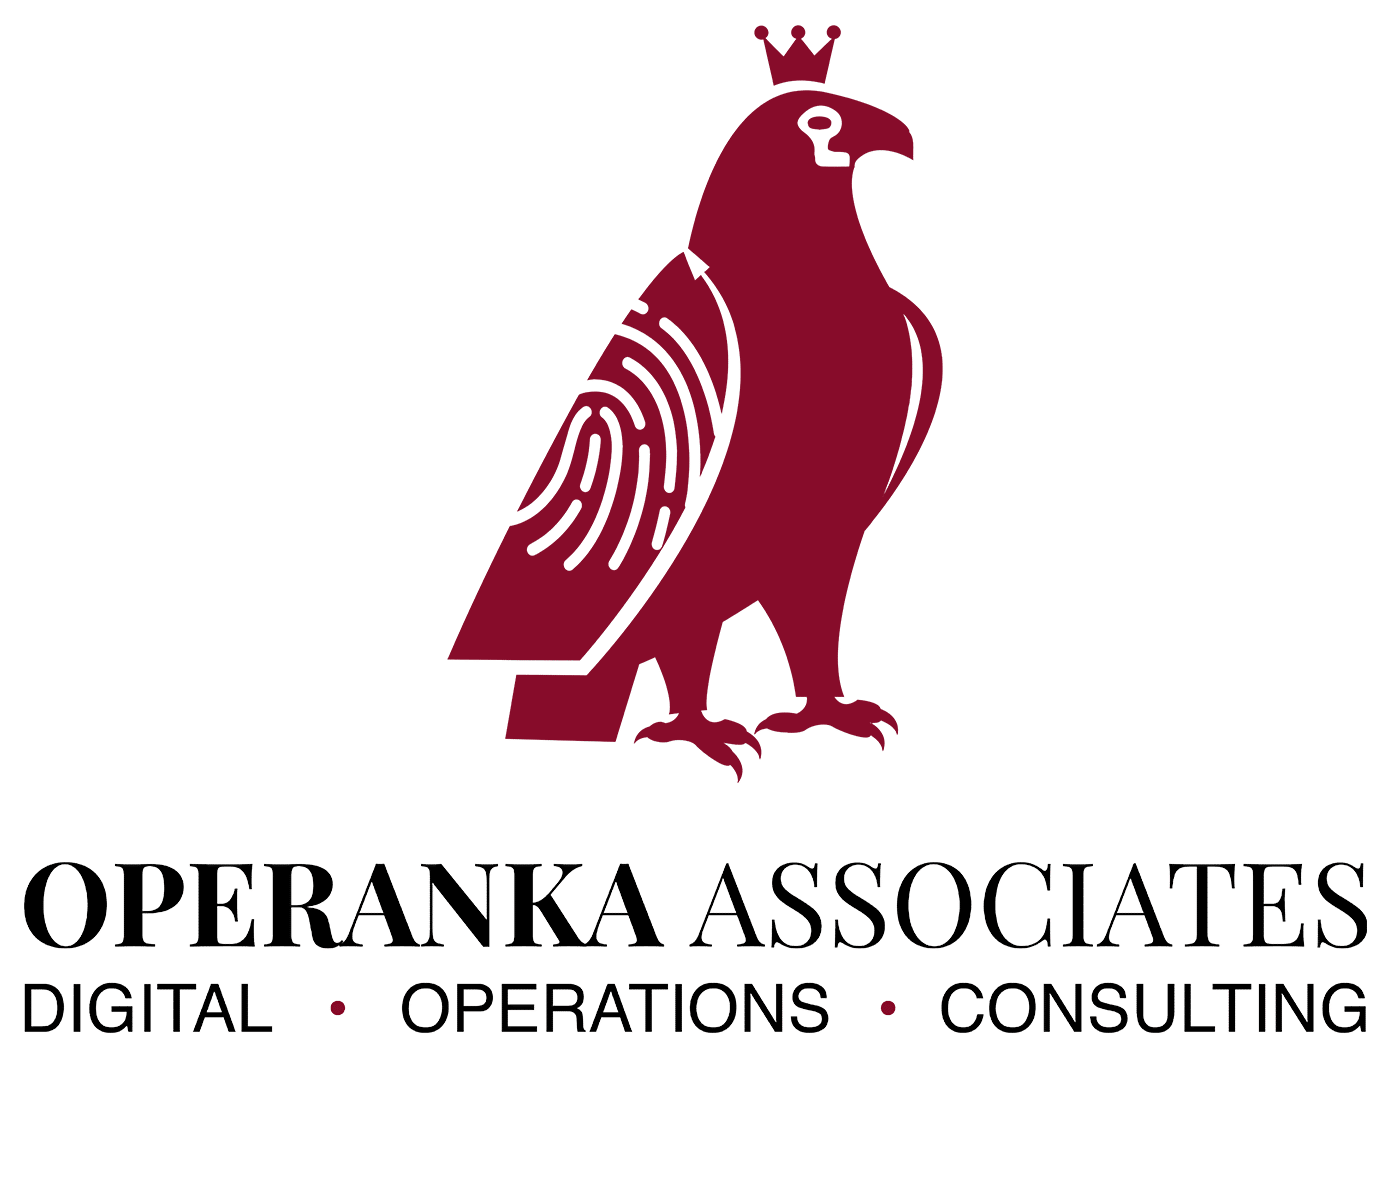 Logo Operanka Associates, Digital Operations Consulting, Channeling your talents. Impacting the world